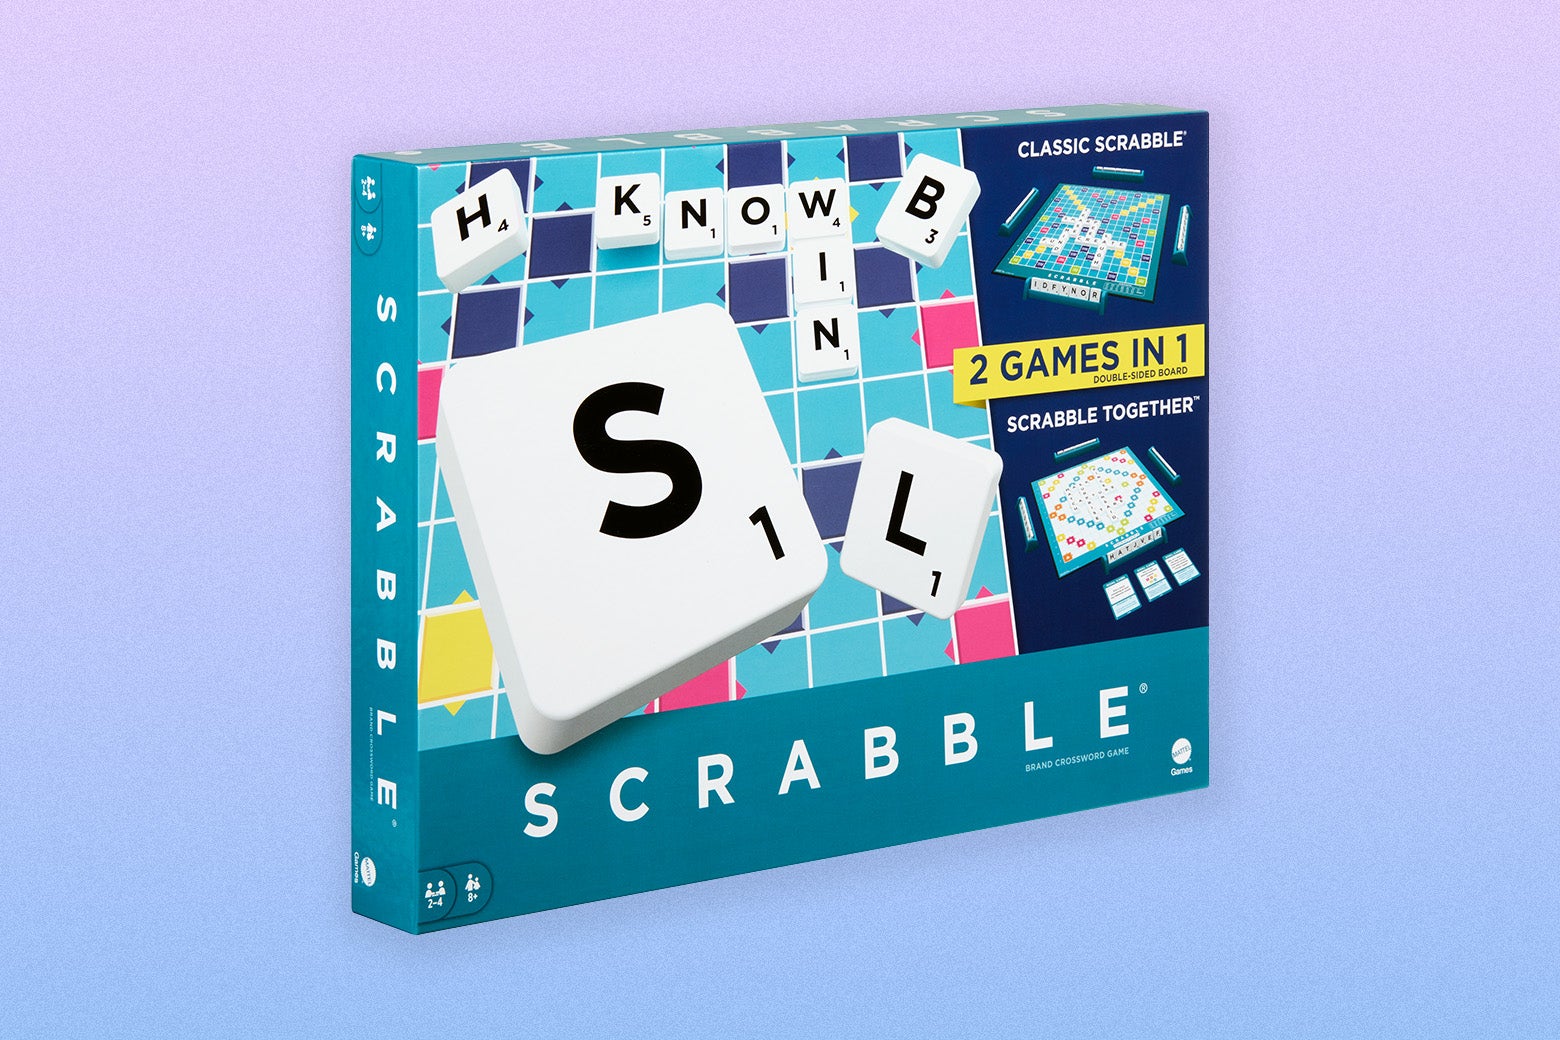 The game stands in its box, which reads Scrabble, but is more pastel-colored rather than the usual red. The dominant color is teal.